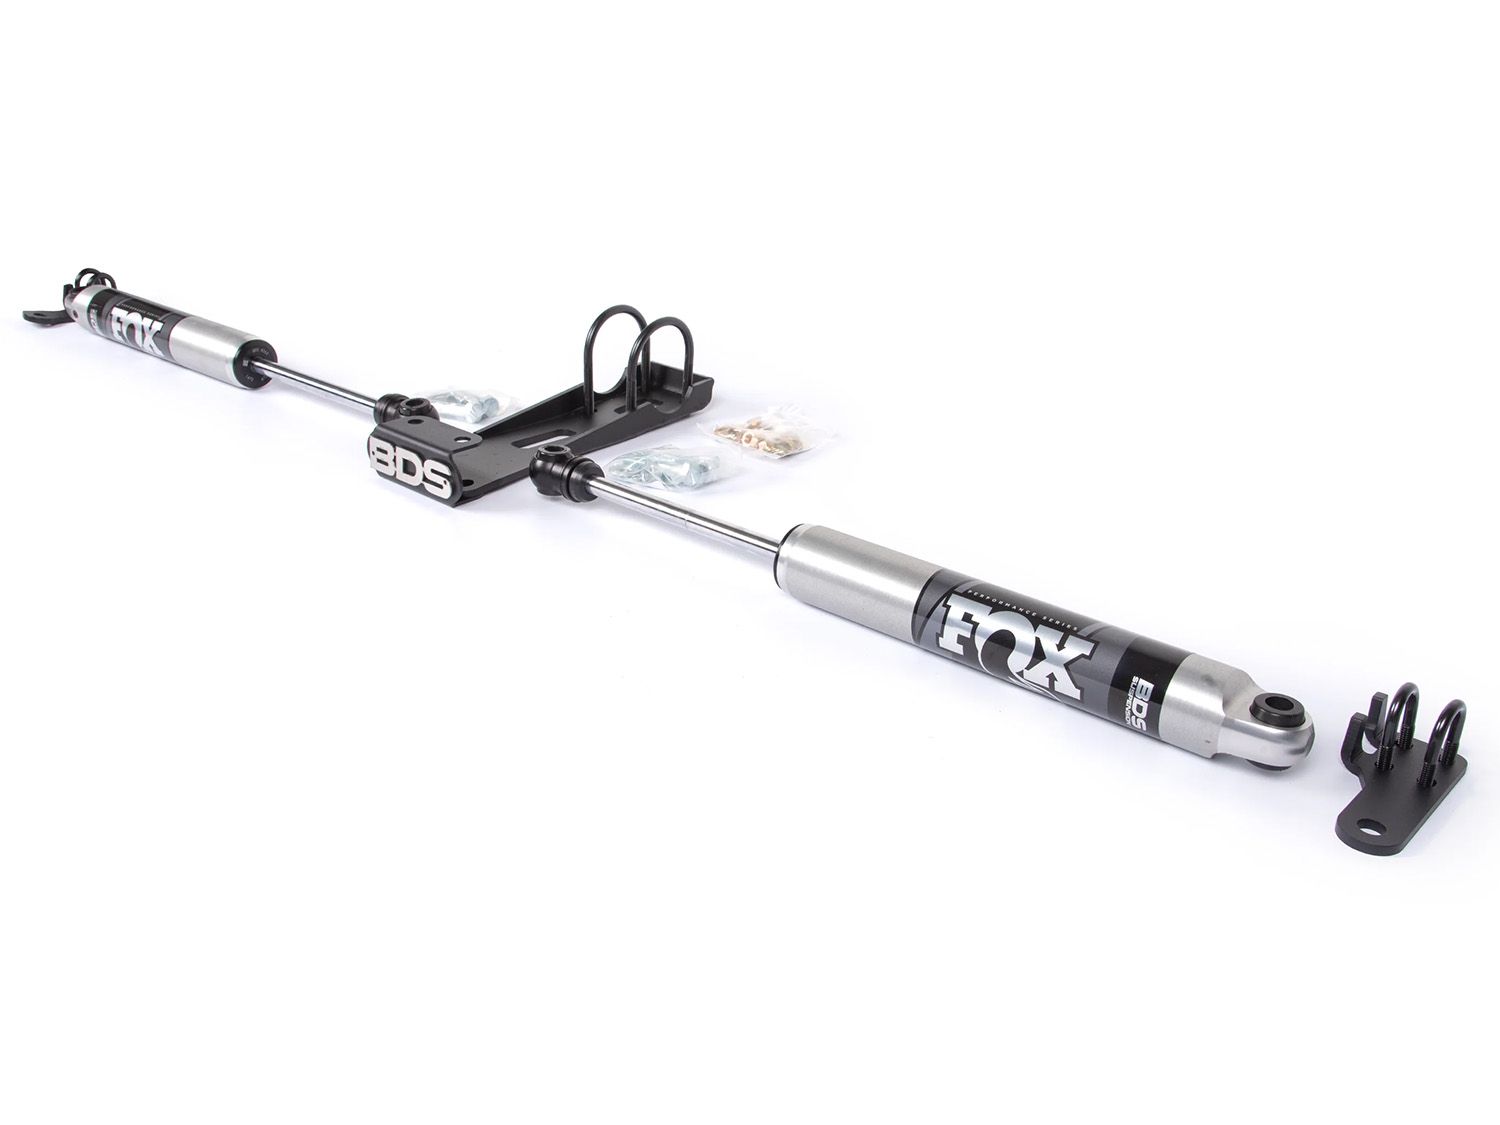 Wrangler TJ 1997-2006 Jeep 4WD - Fox Dual Steering Stabilizer by BDS